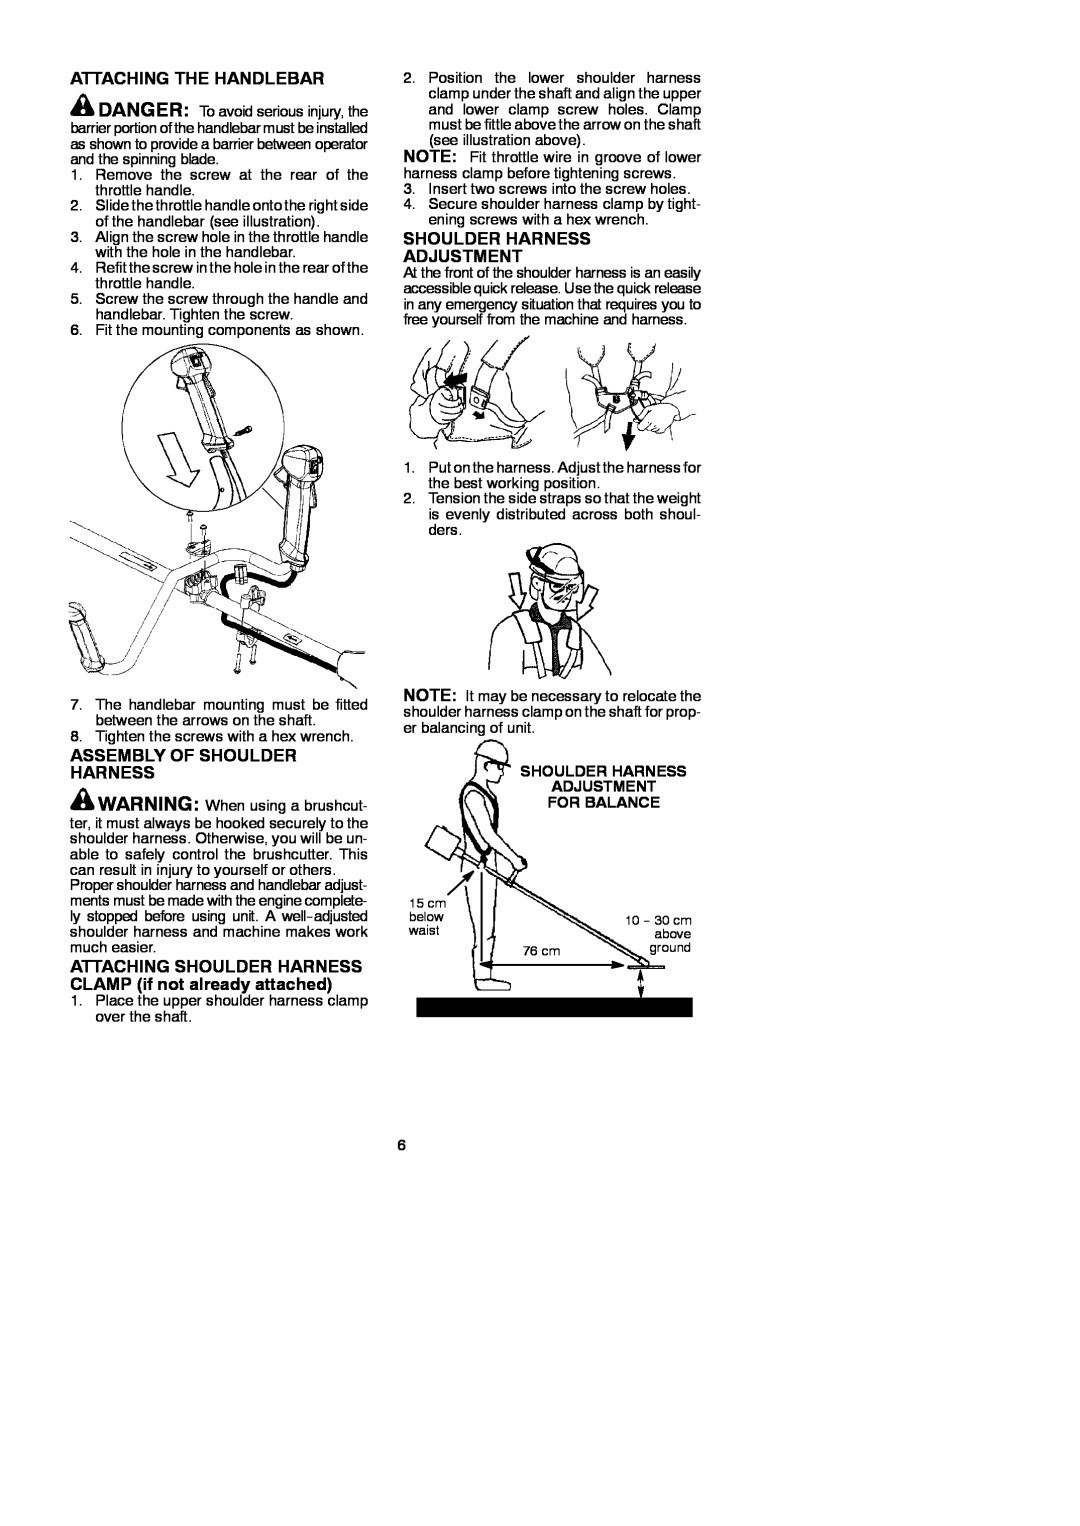 McCulloch 952715746, 433B, 115154526 Attaching The Handlebar, Shoulder Harness Adjustment, Assembly Of Shoulder Harness 